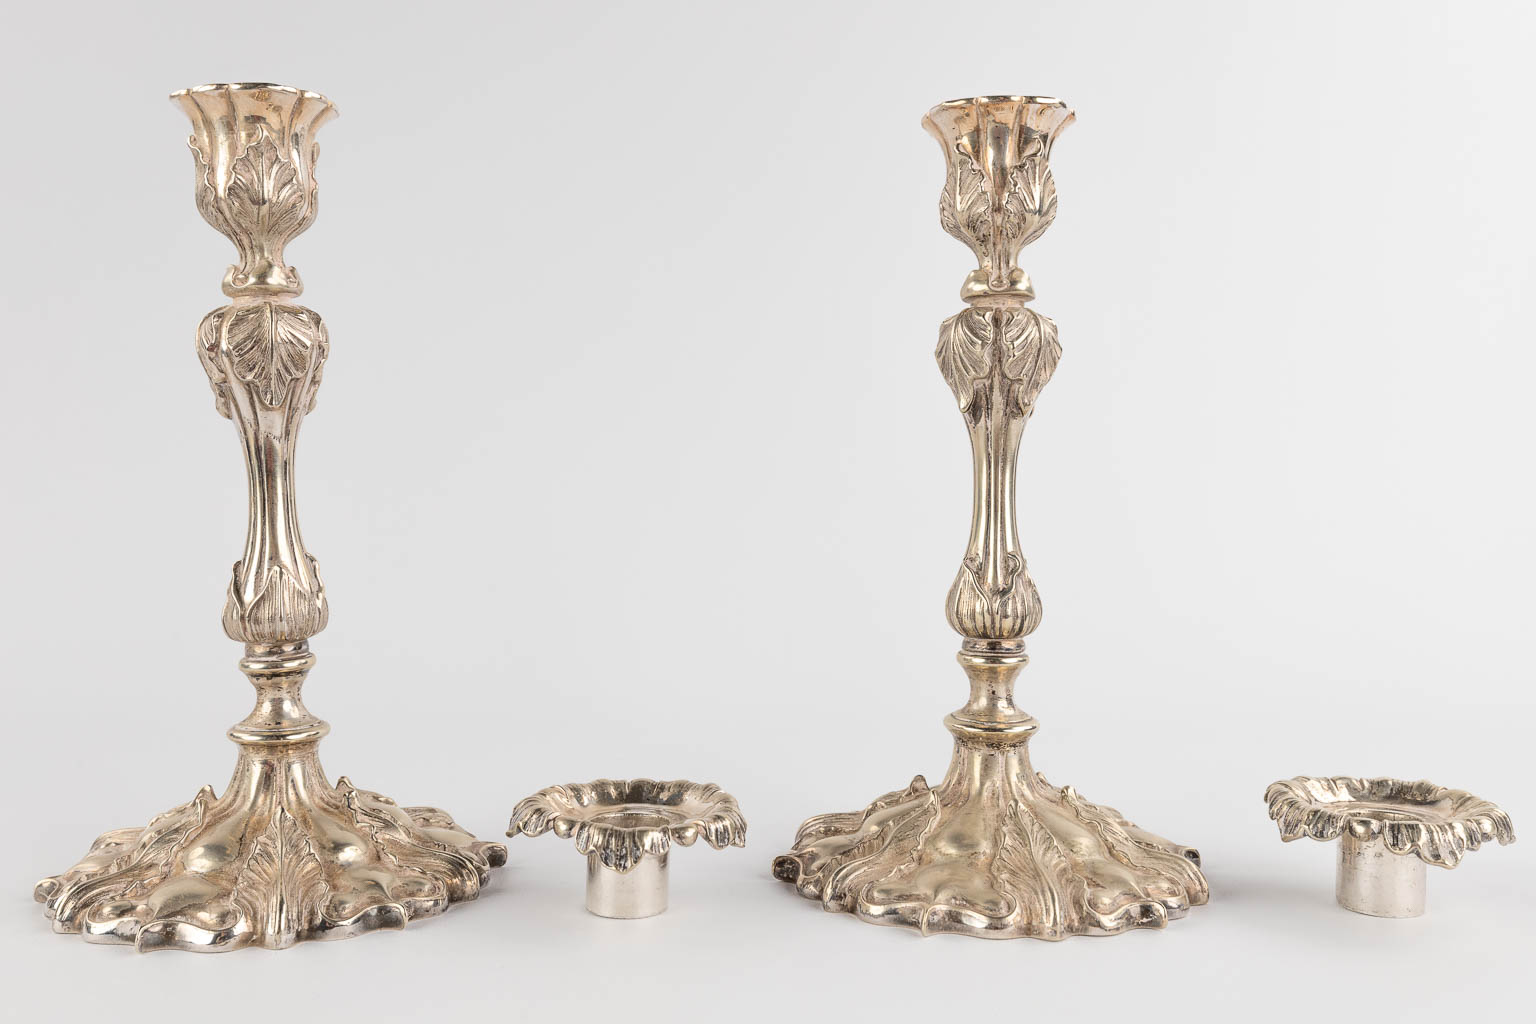 Two candlesticks and a candelabra, silver-plated bronze. Louis XV style. (H:62 x D:40 cm) - Bild 23 aus 25